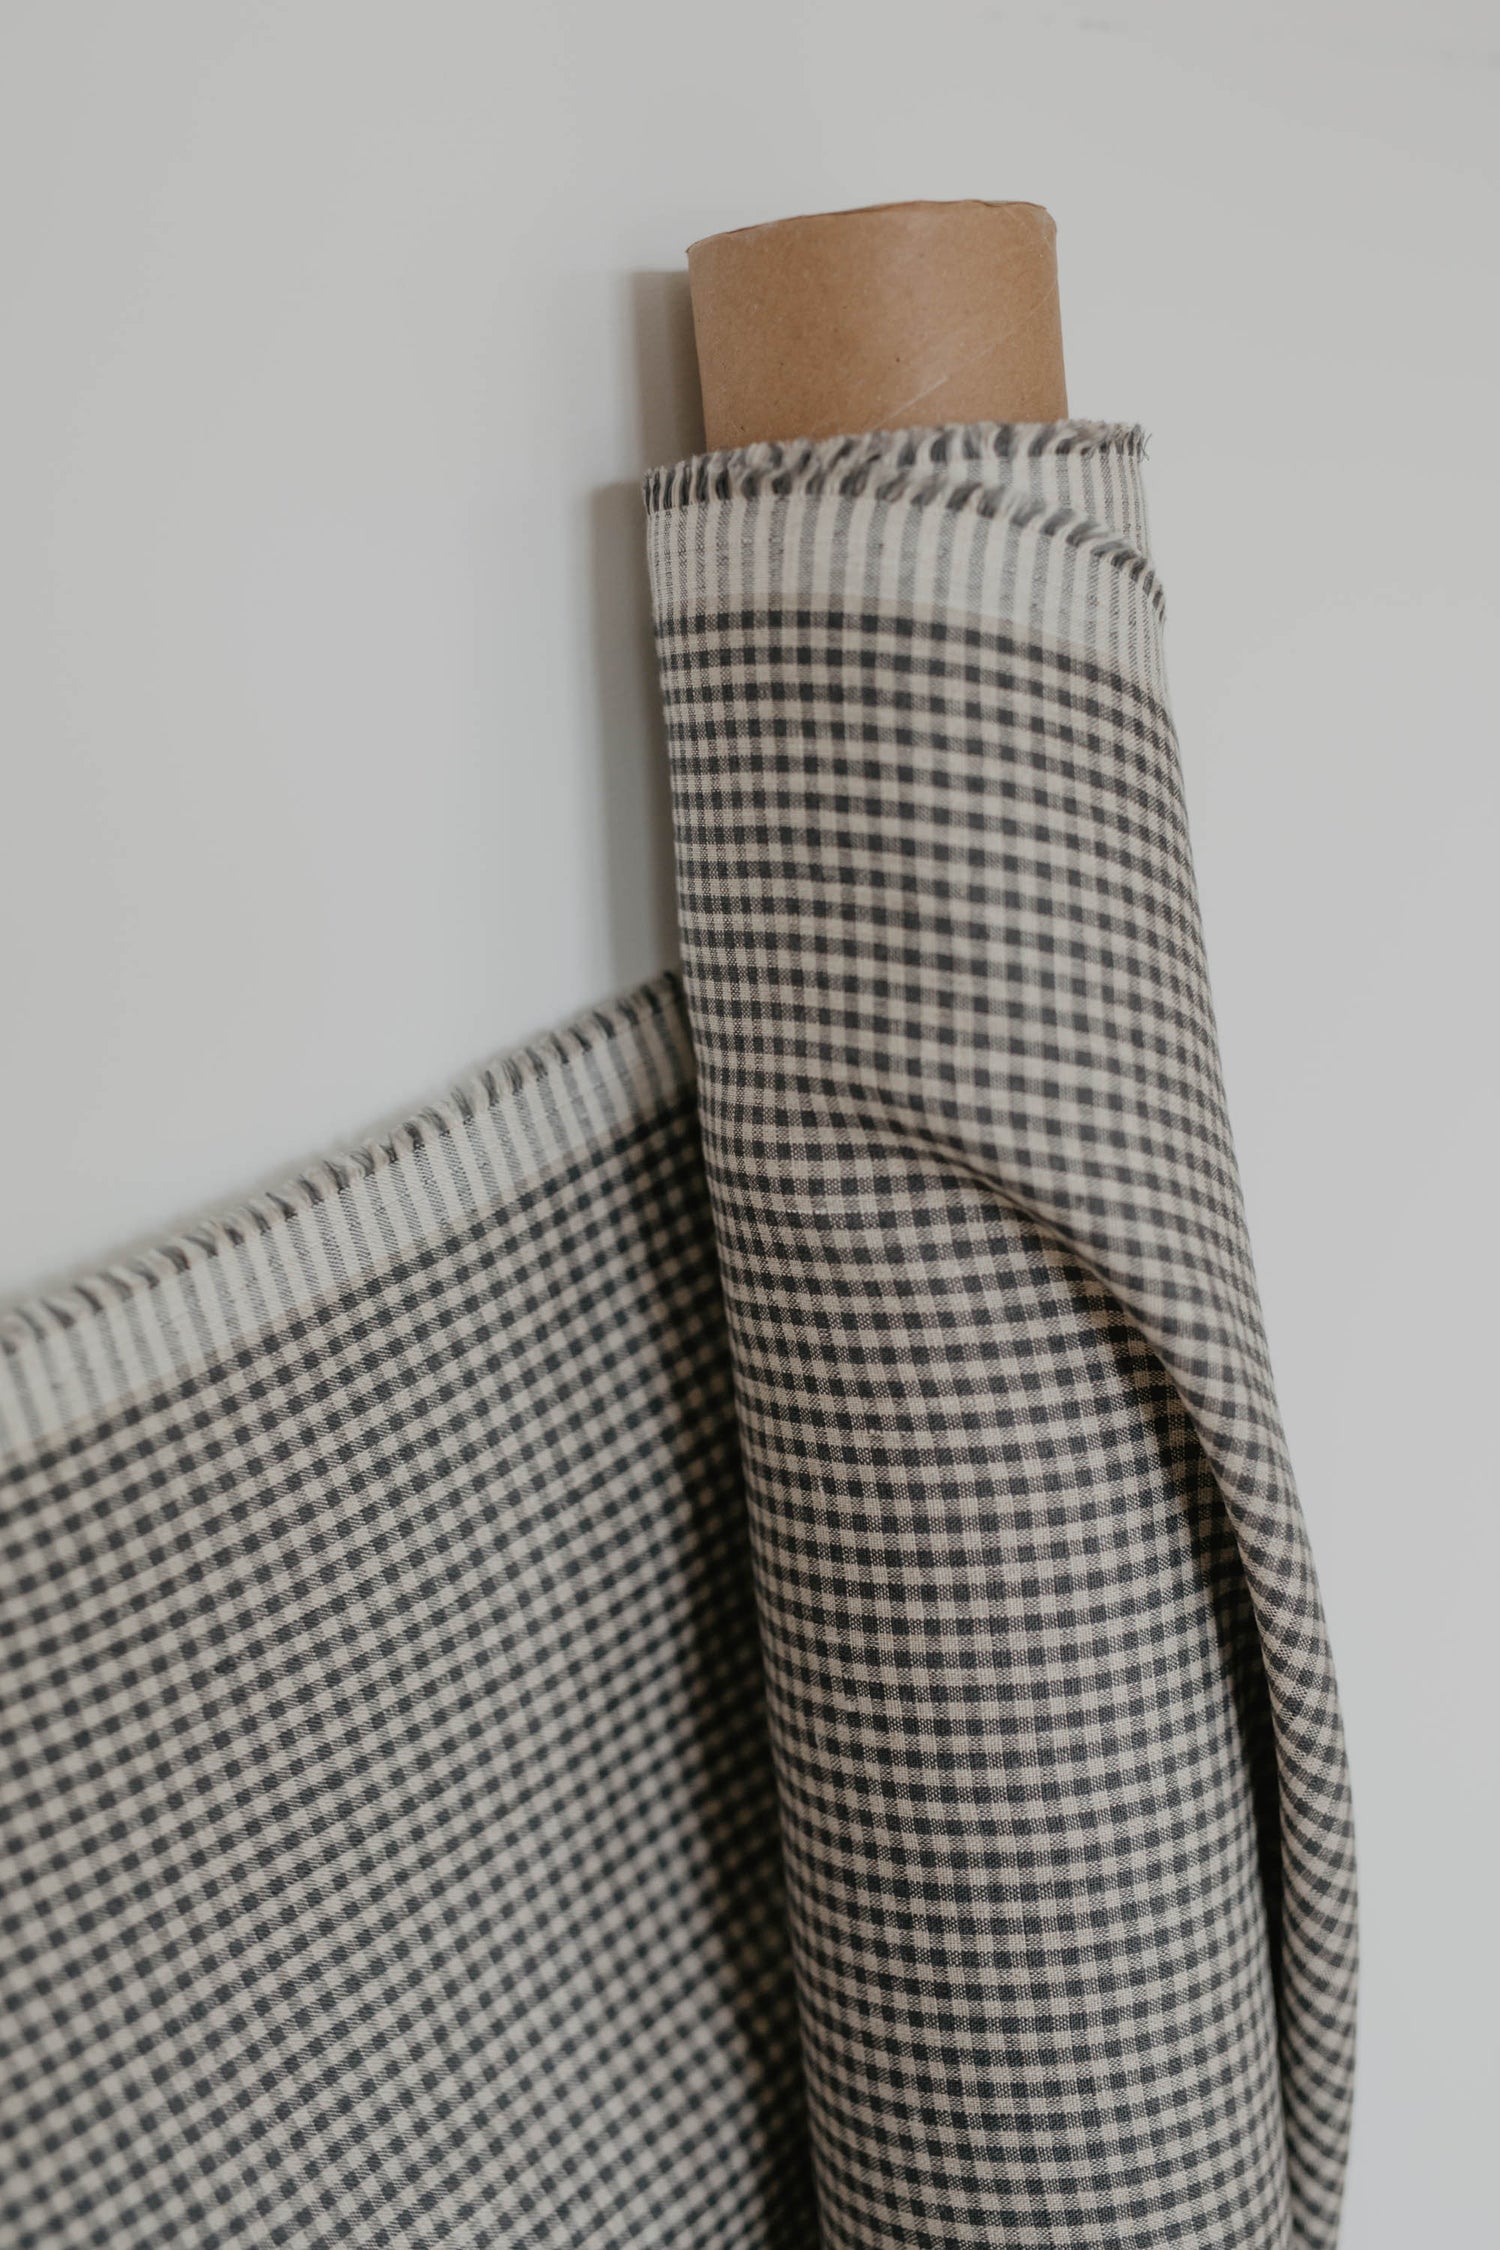 roll of blue check linen fabric